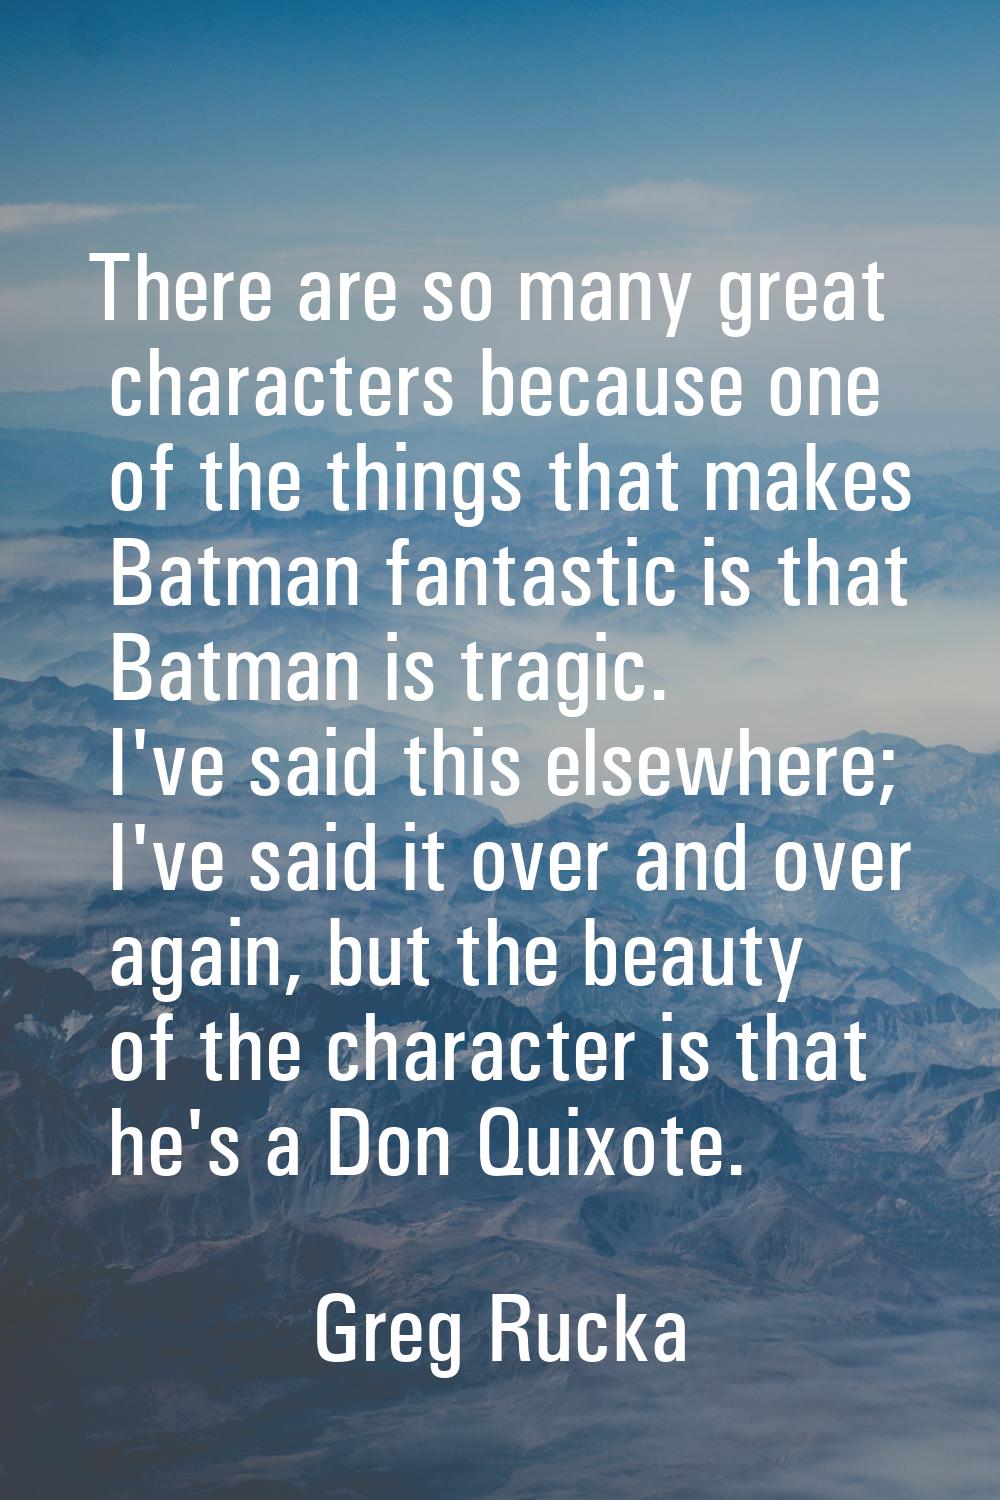 There are so many great characters because one of the things that makes Batman fantastic is that Ba